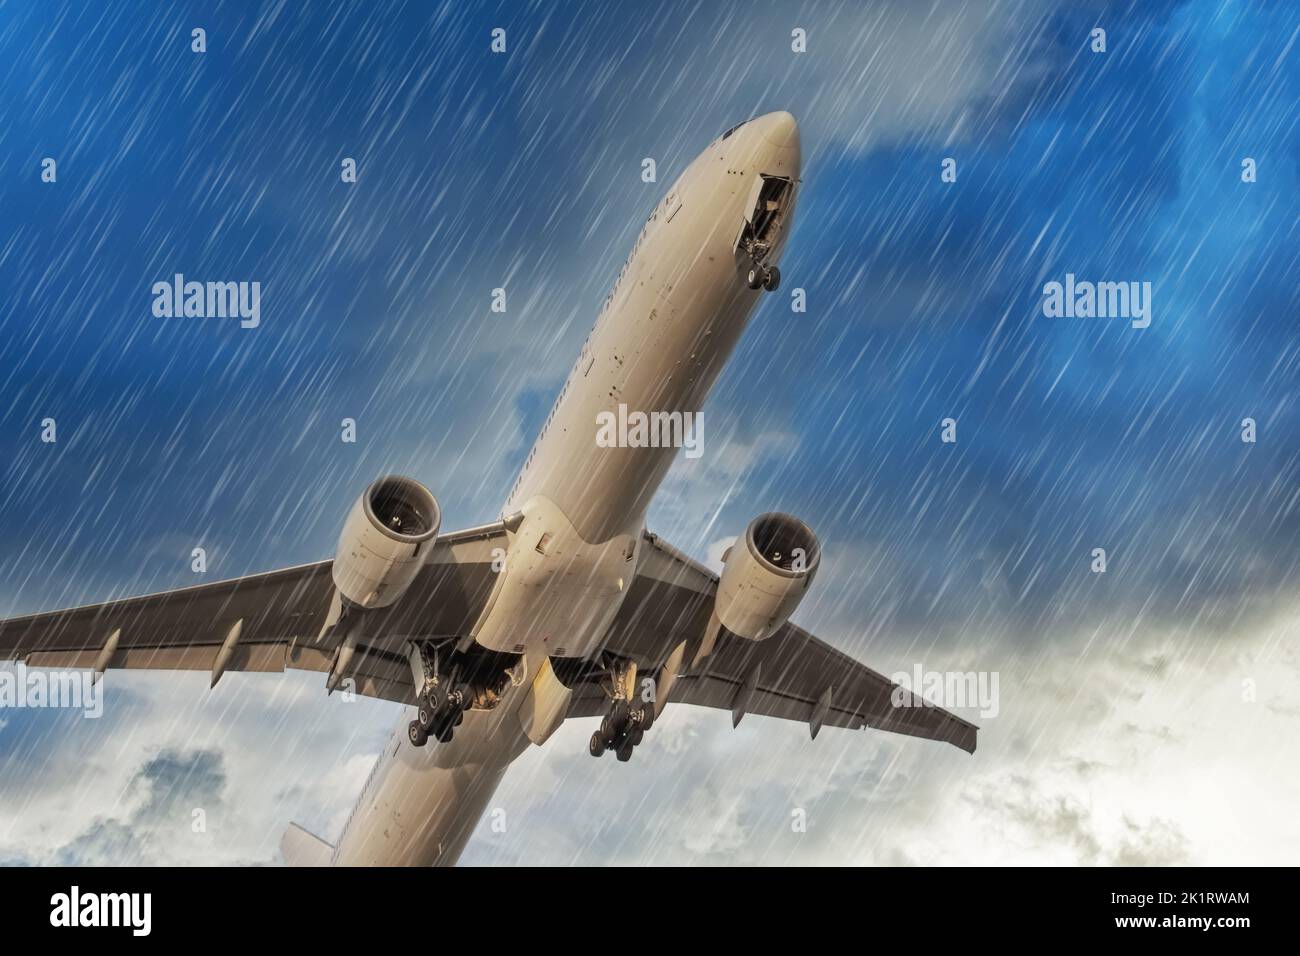 Airplane takes off rapidly during in bad weather storm hurricane rain llightning strike Stock Photo